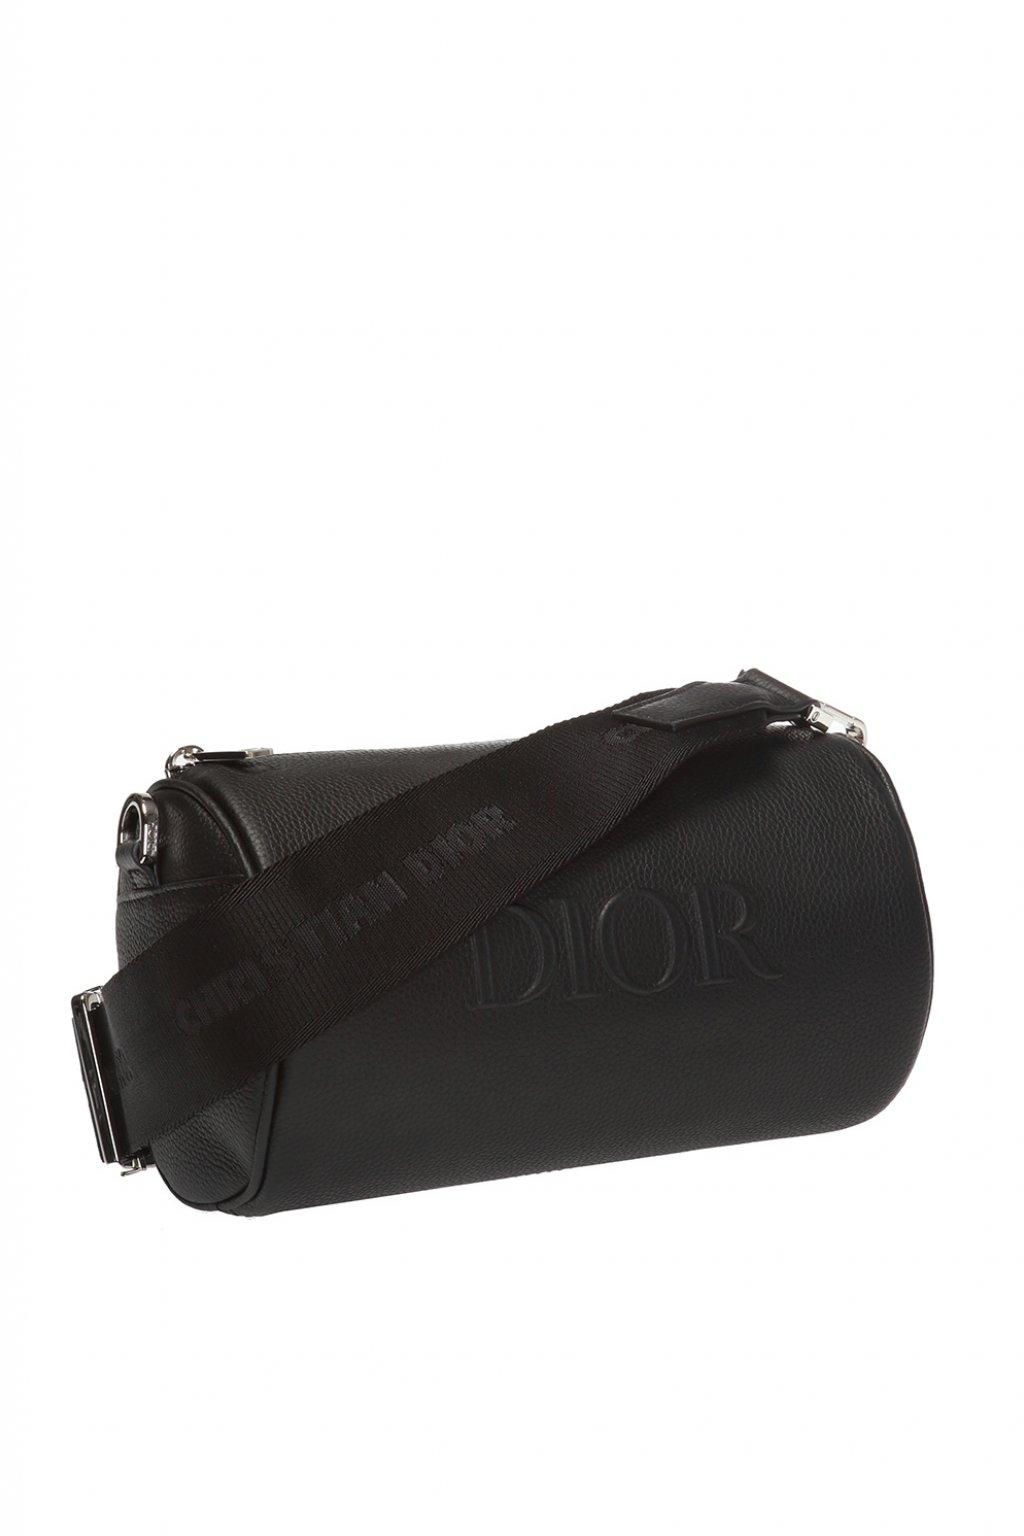 dior homme roller pouch